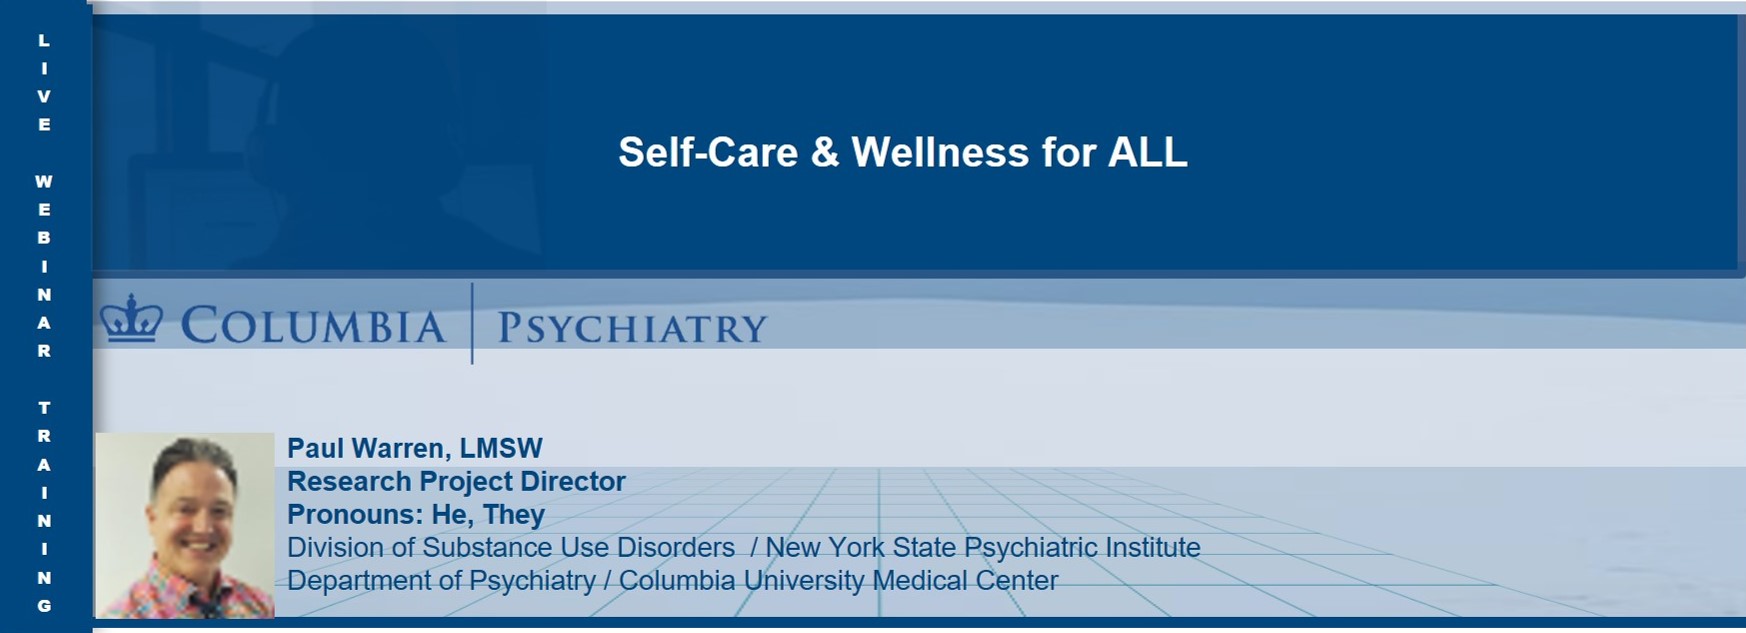 Self-Care and Wellness for ALL